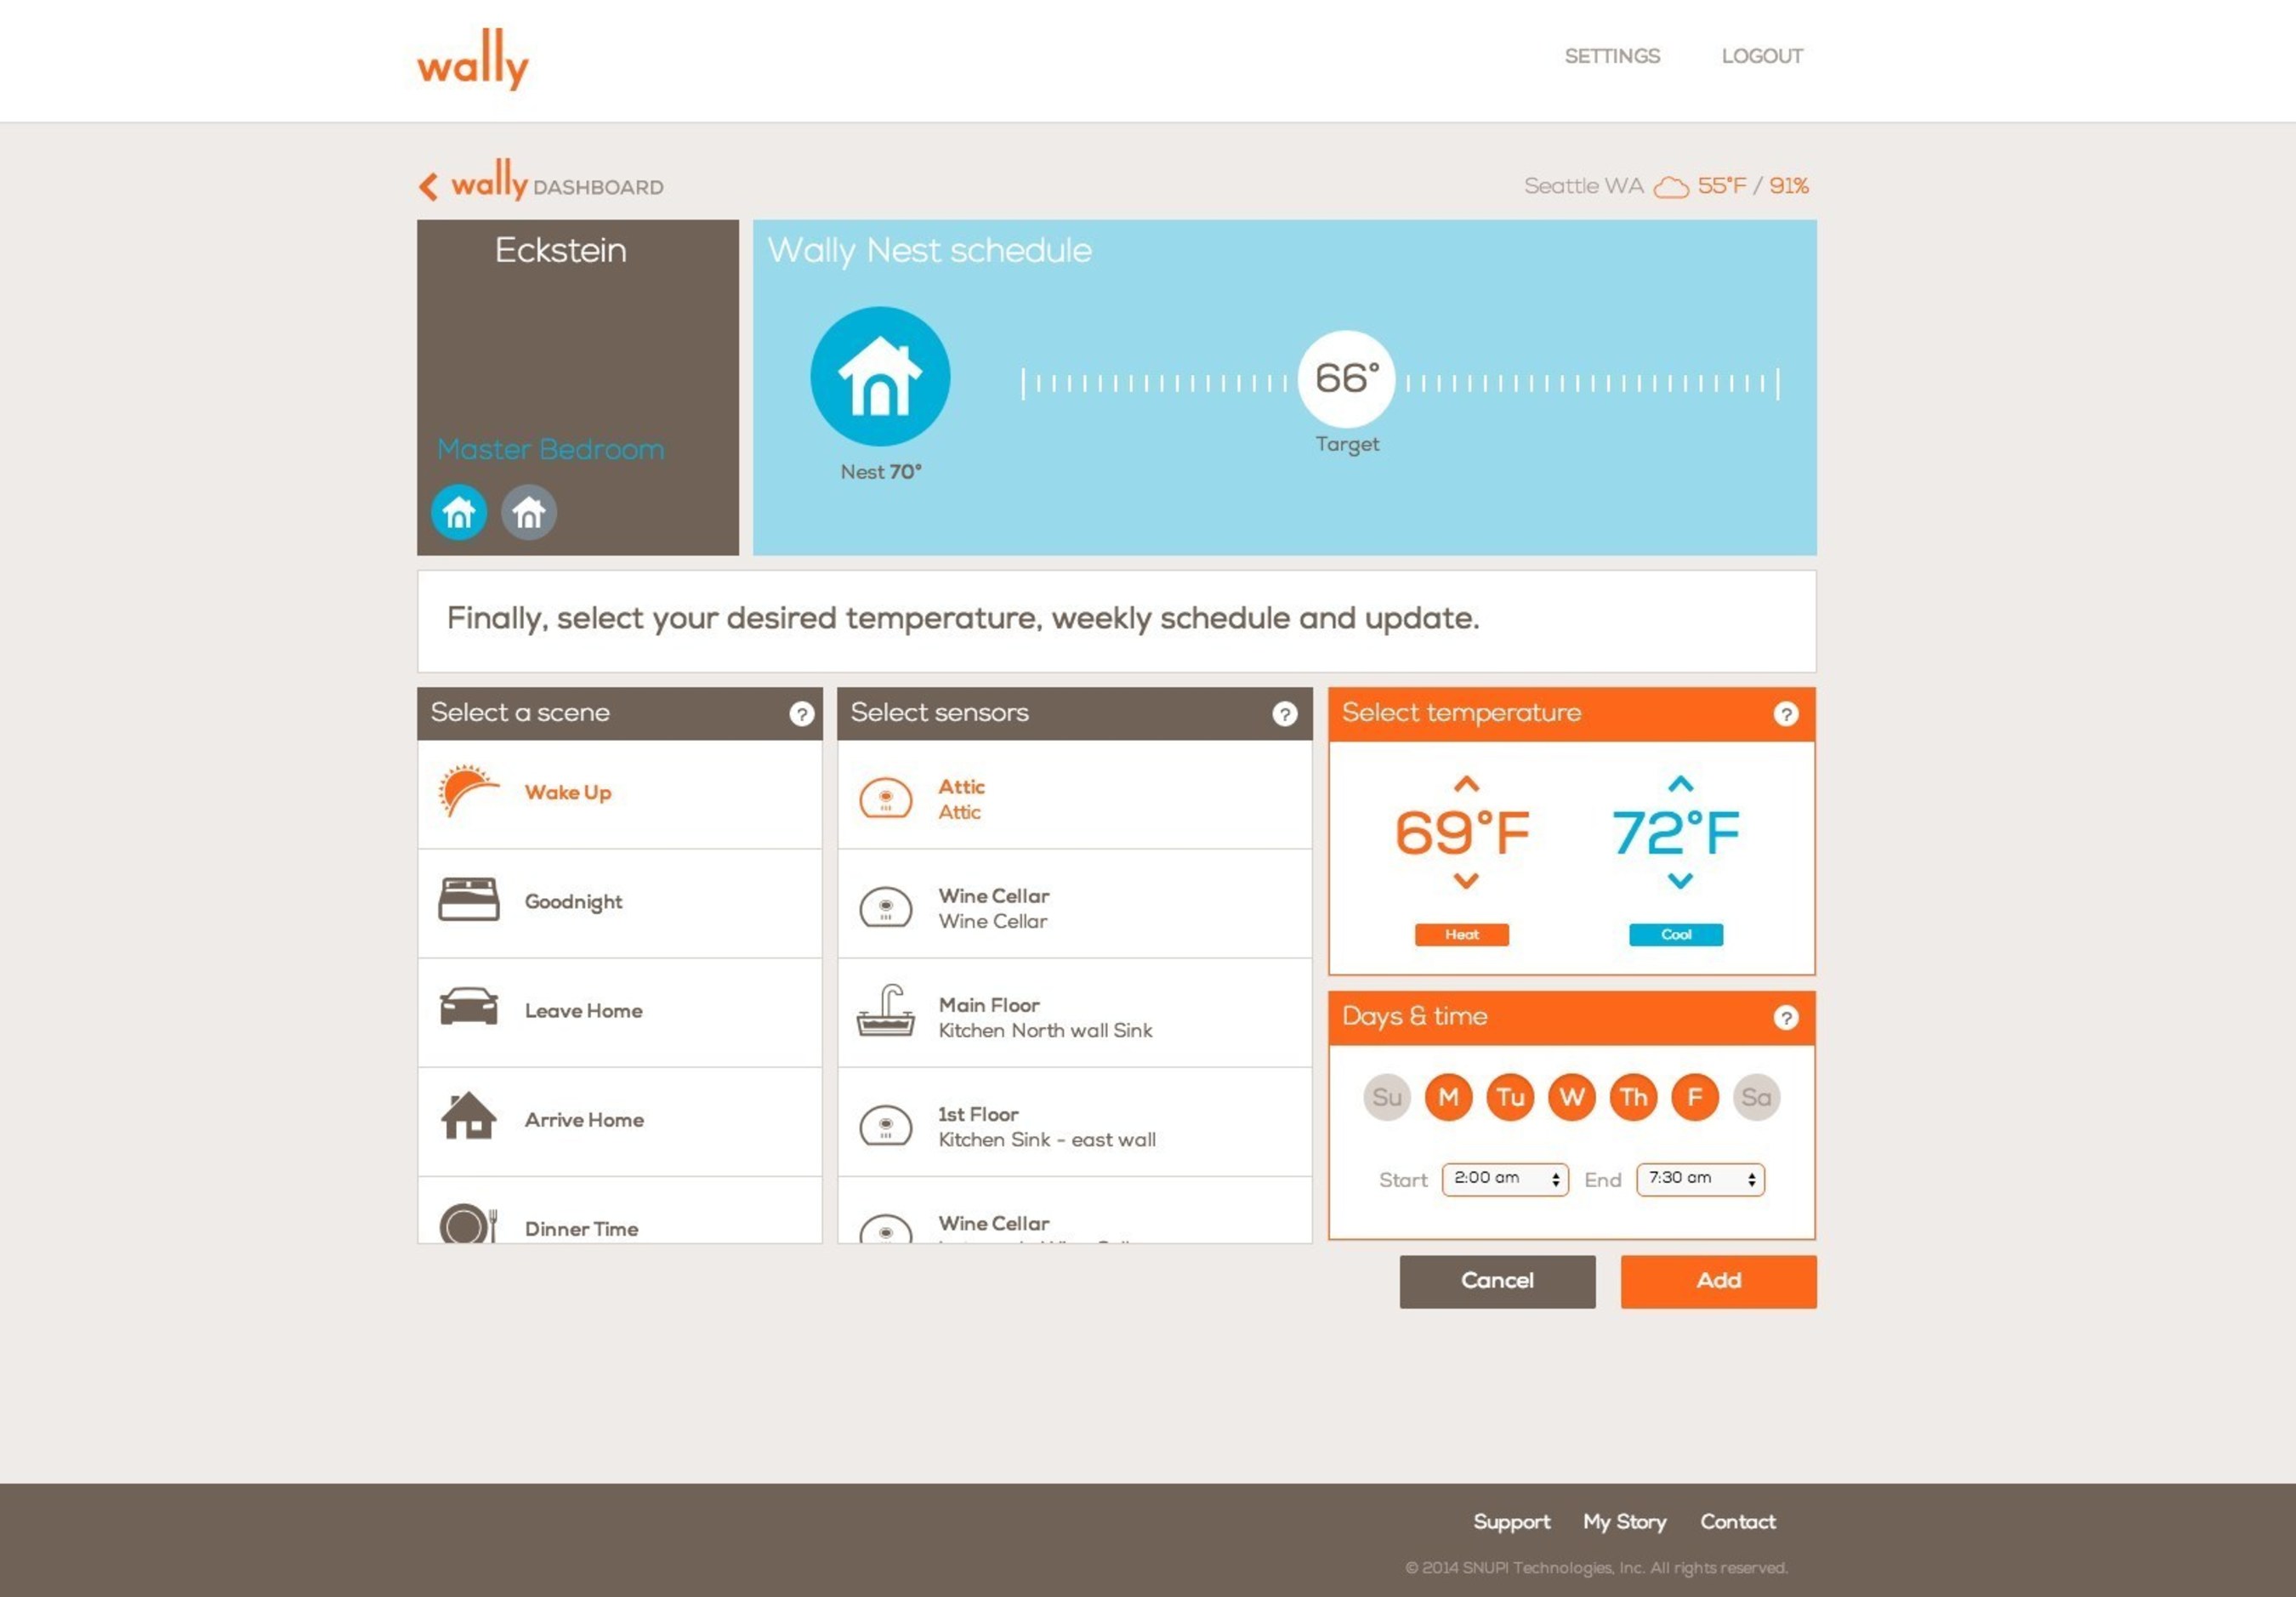 WallyHome with Nest Thermostat highlights the practical benefits of pairing smart home devices with a simple way to maintain a more intelligent, efficient and comfortable home. A dedicated Nest scheduler in the Wally Dashboard can now be used with WallyHome and the Nest Thermostat to help optimize the ideal temperature in multiple rooms for whole-home comfort.